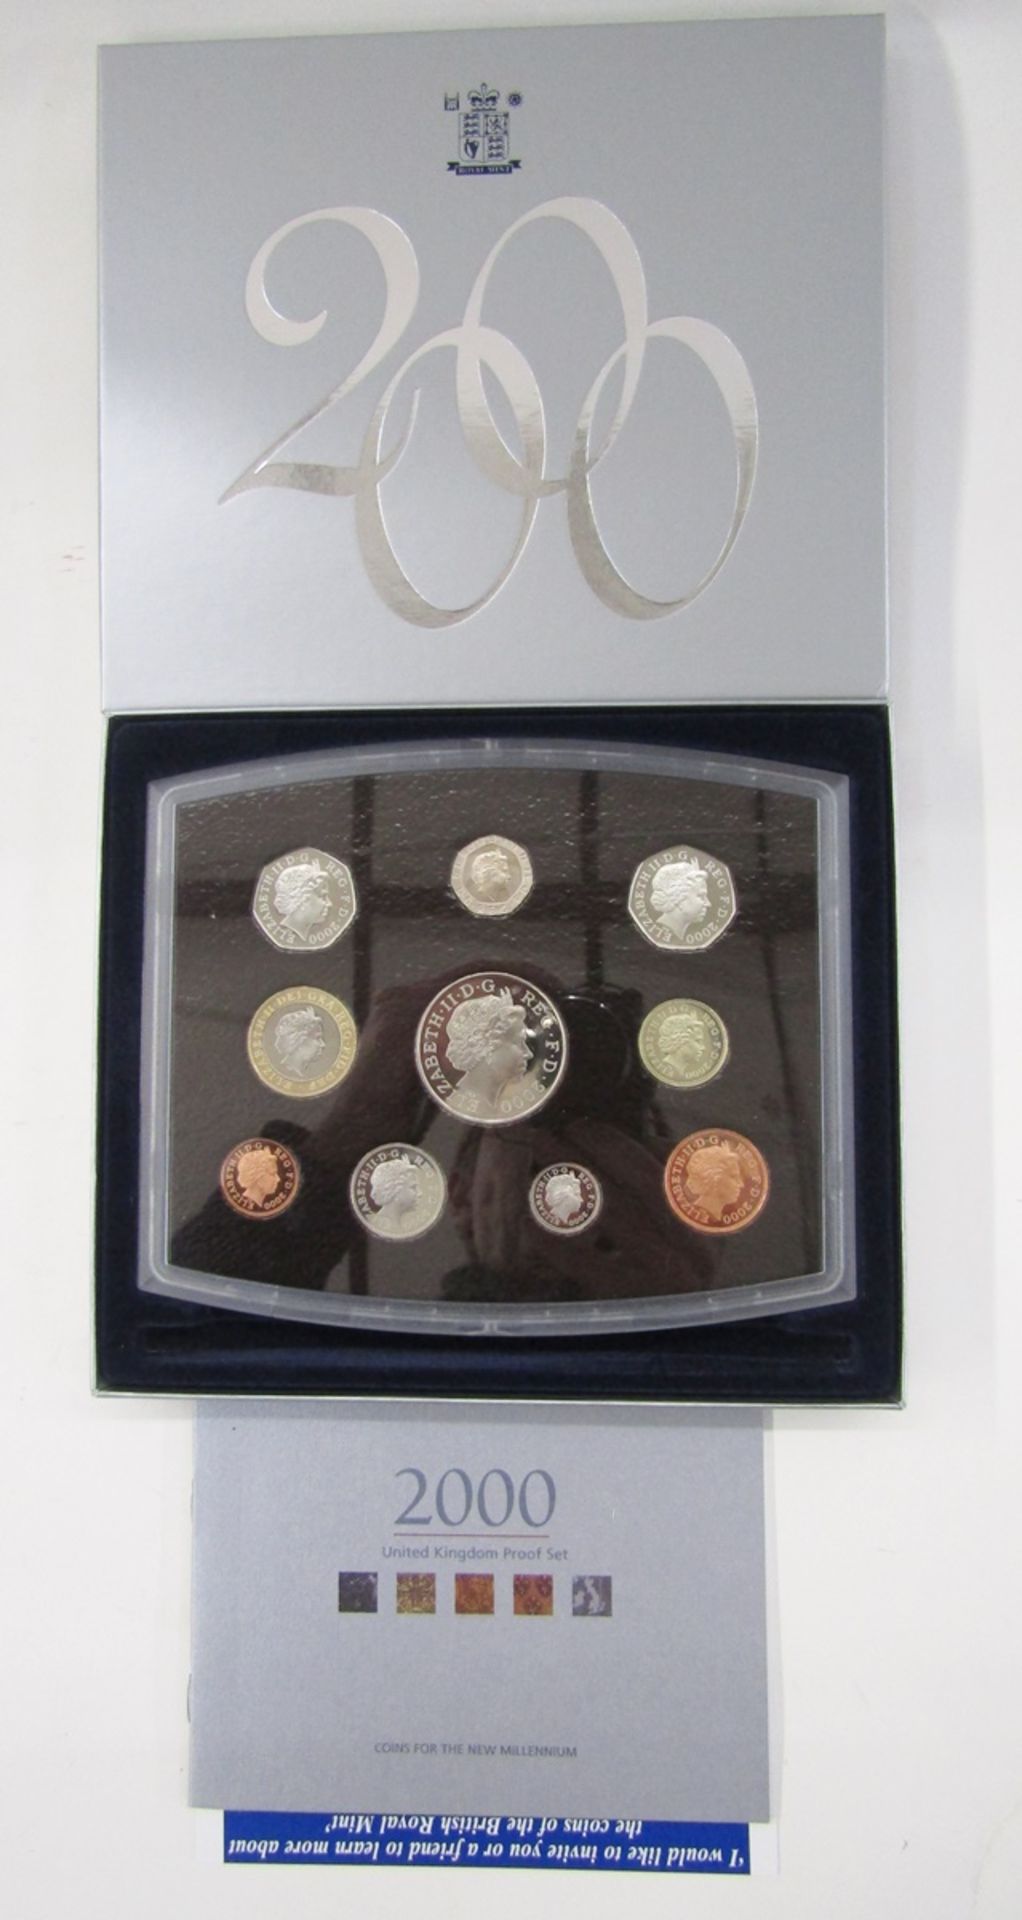 United Kingdom proof sets (5), 1996, 1997, 1998, 1999 and 2000. - Image 4 of 5